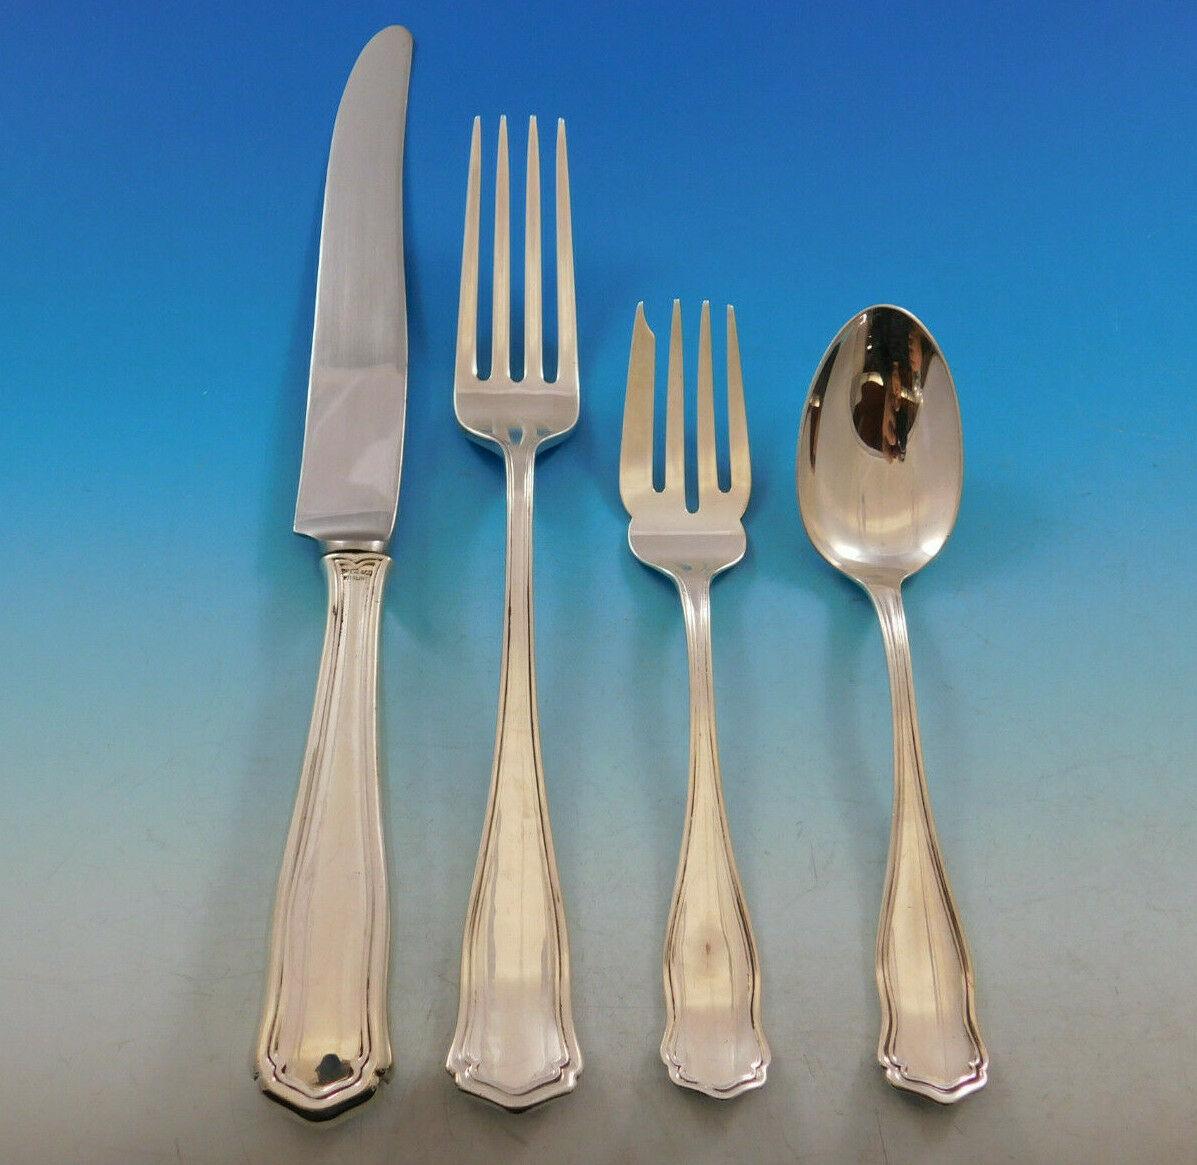 Exquisite dinner size Winchester by Shreve & Co. sterling silver flatware set - 89 pieces. This Arts & Crafts pattern was introduced in the year 1910 and features a unique raised border. This set includes:

8 dinner size knives, 9 5/8